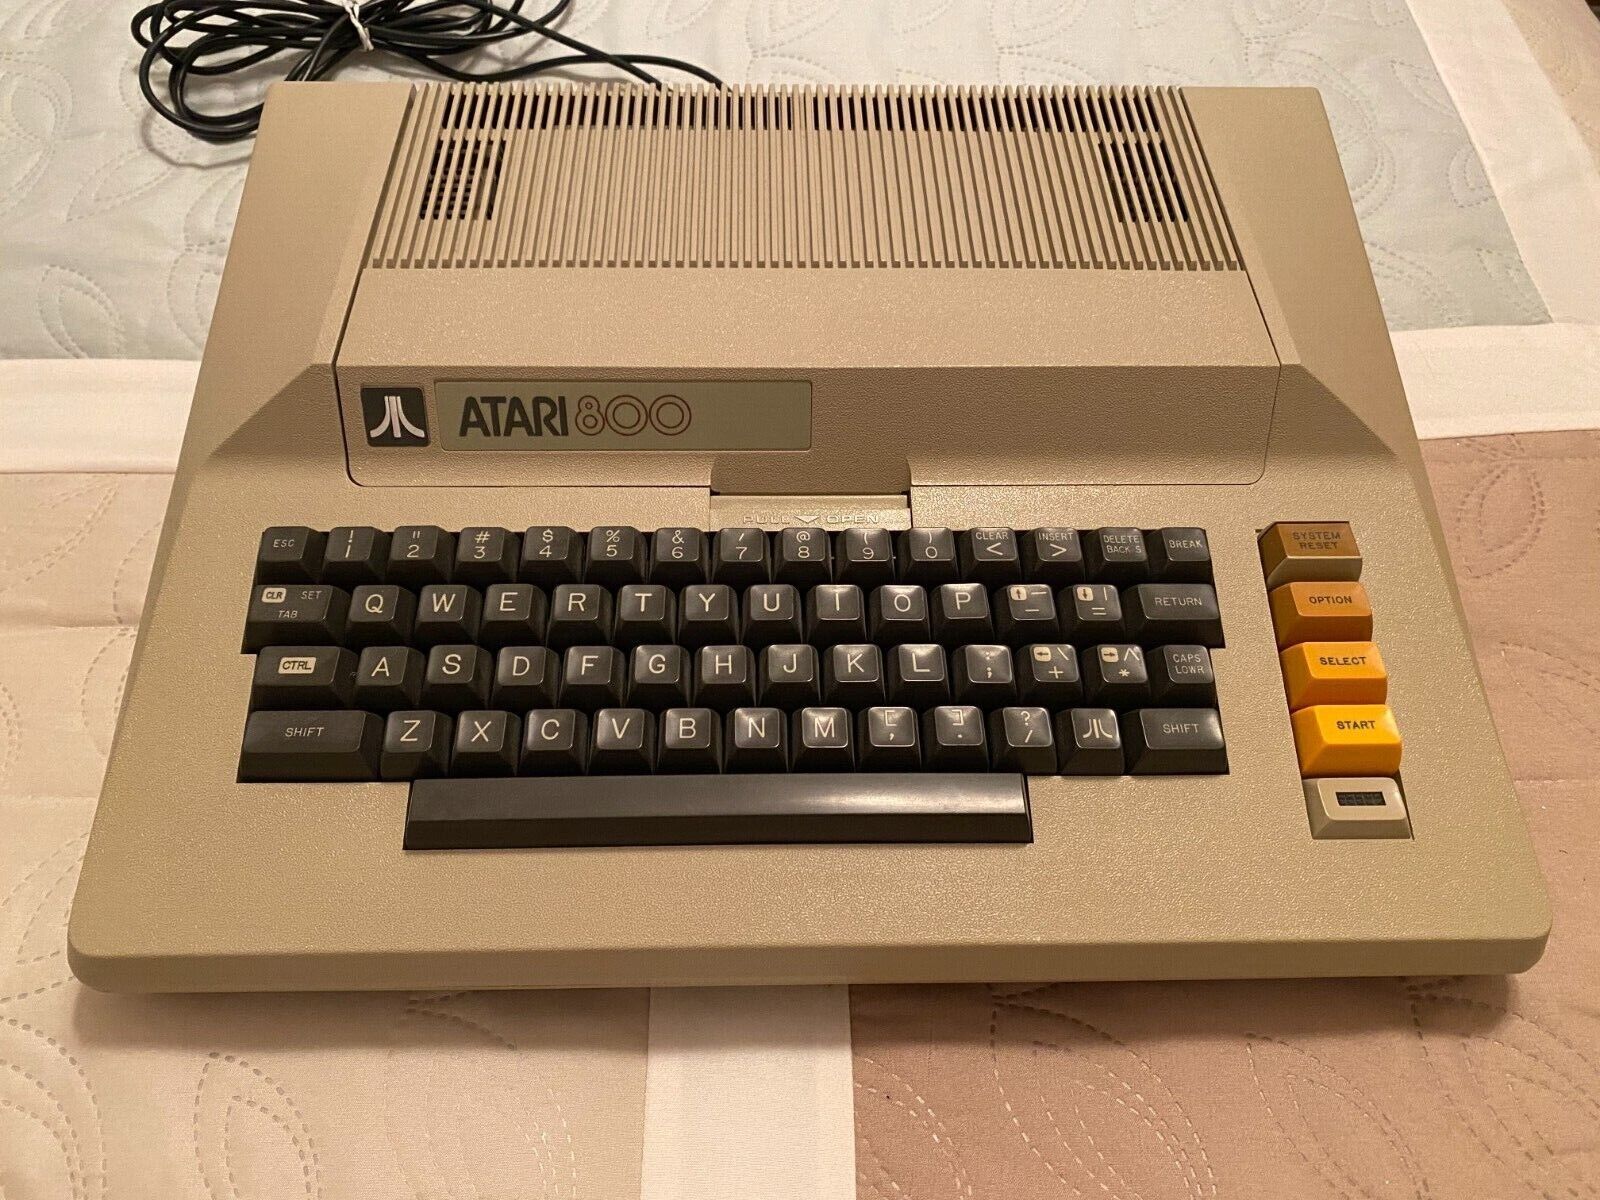 Atari 800 Computer, Original, WORKS, Clean and Neat, Accessories, Power Cord